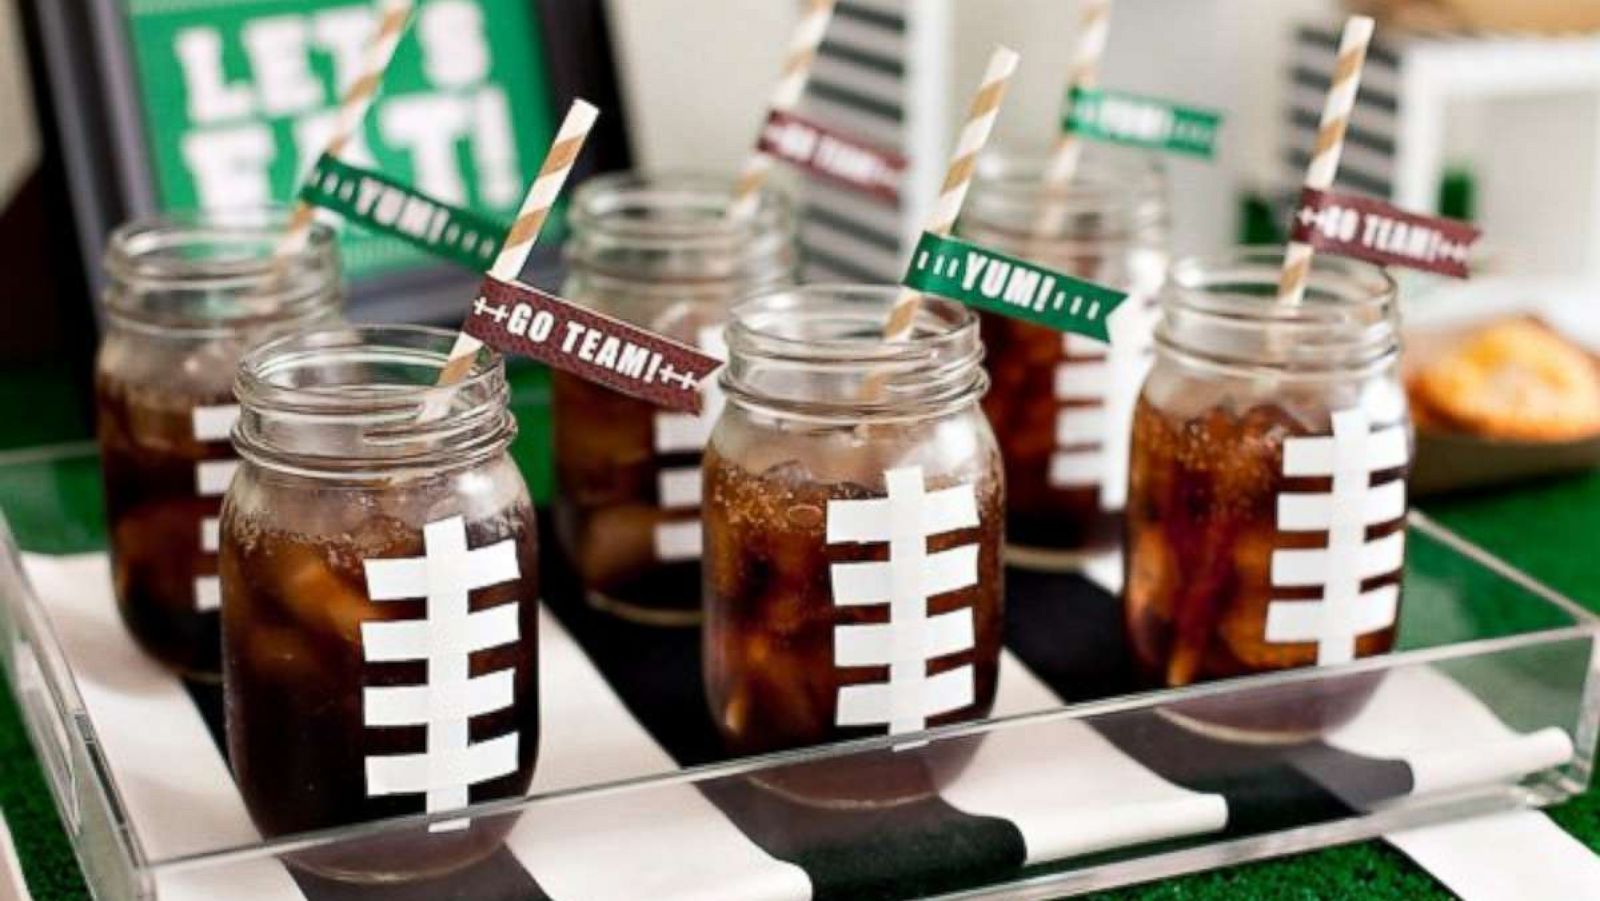 PHOTO: Add a fun DIY football mason jar to your table. Jennifer Sbranti, founder and creative director of Hostess with the Mostess, uses white duct tape to make football laces.